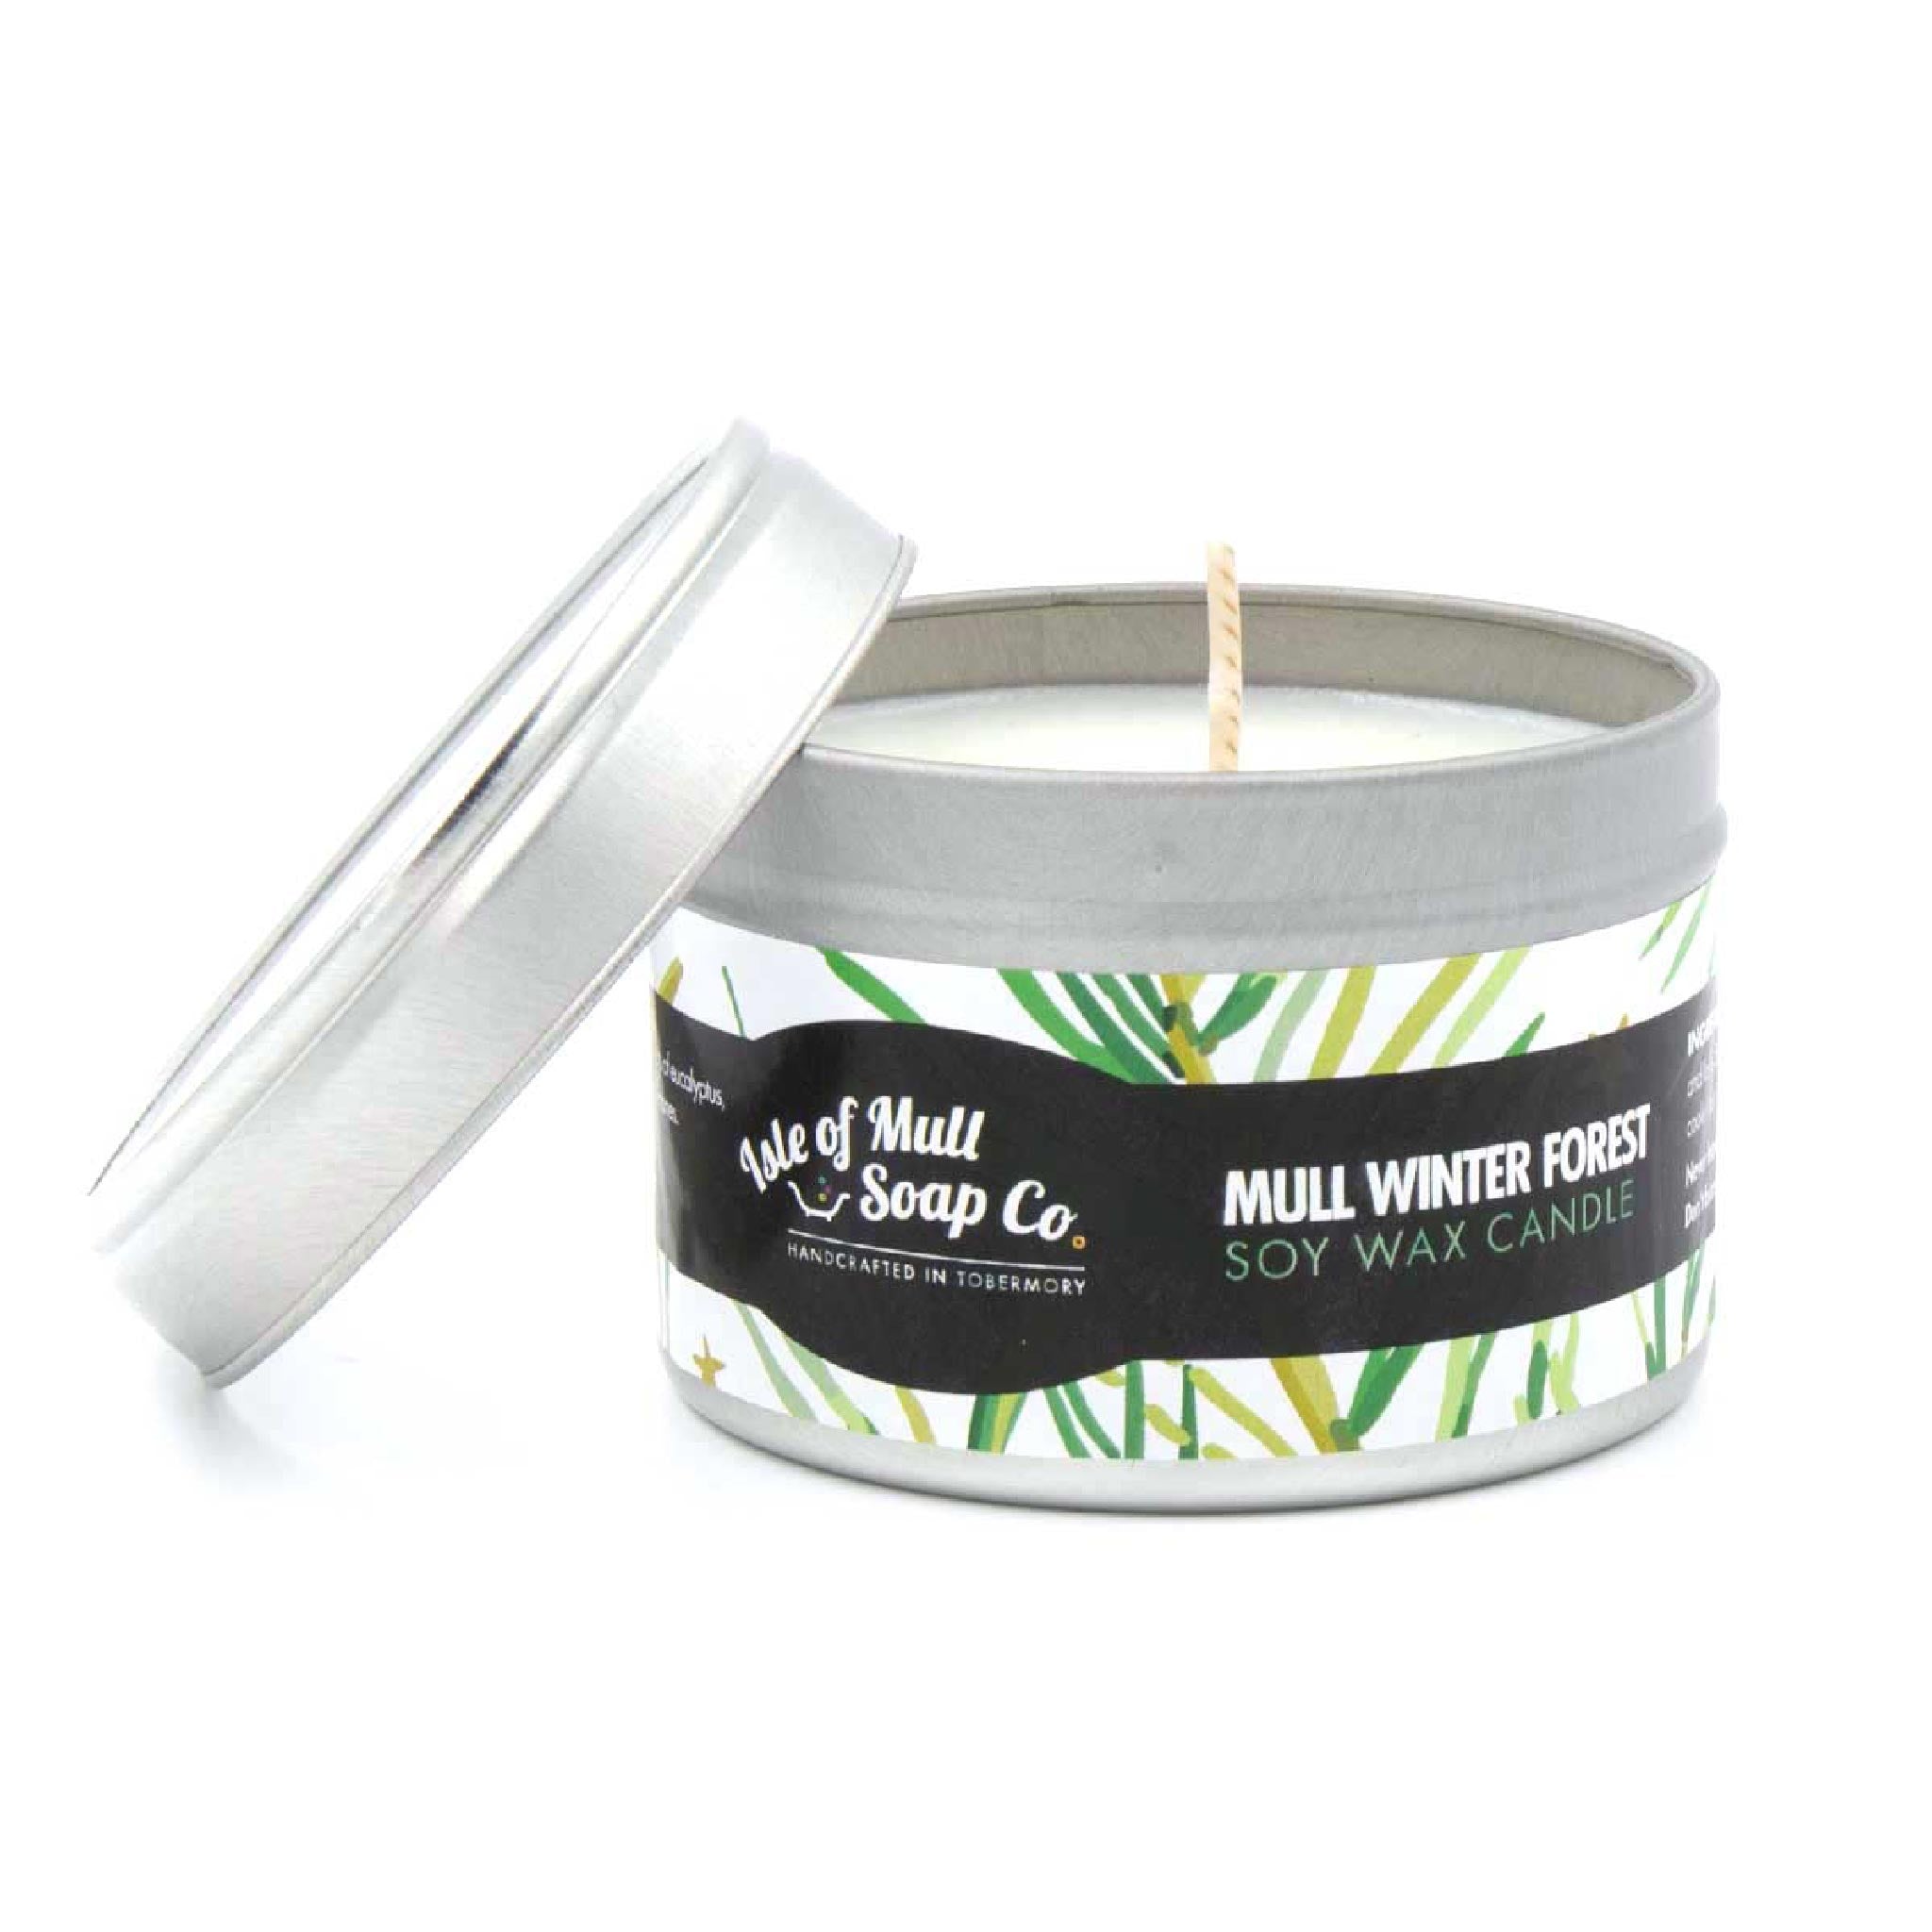 Mull Winter Forest Isle of Mull Candle